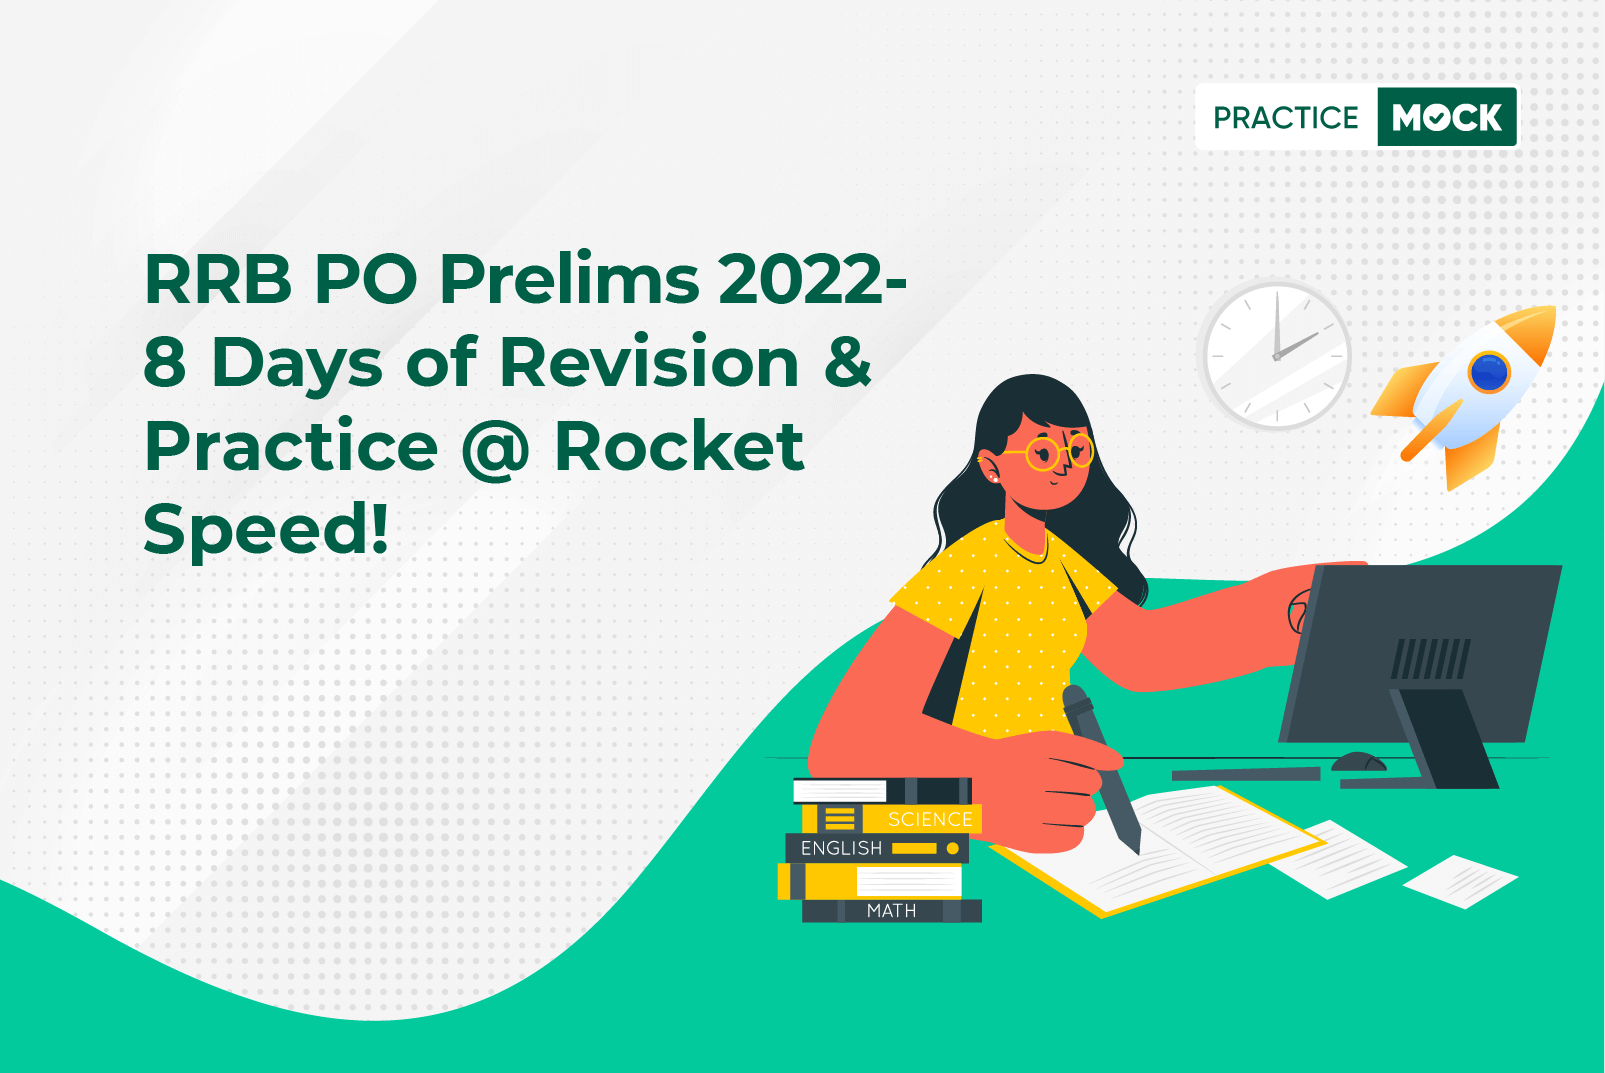 8-Day Revision Plan for RRB PO Prelims 2022 Exam